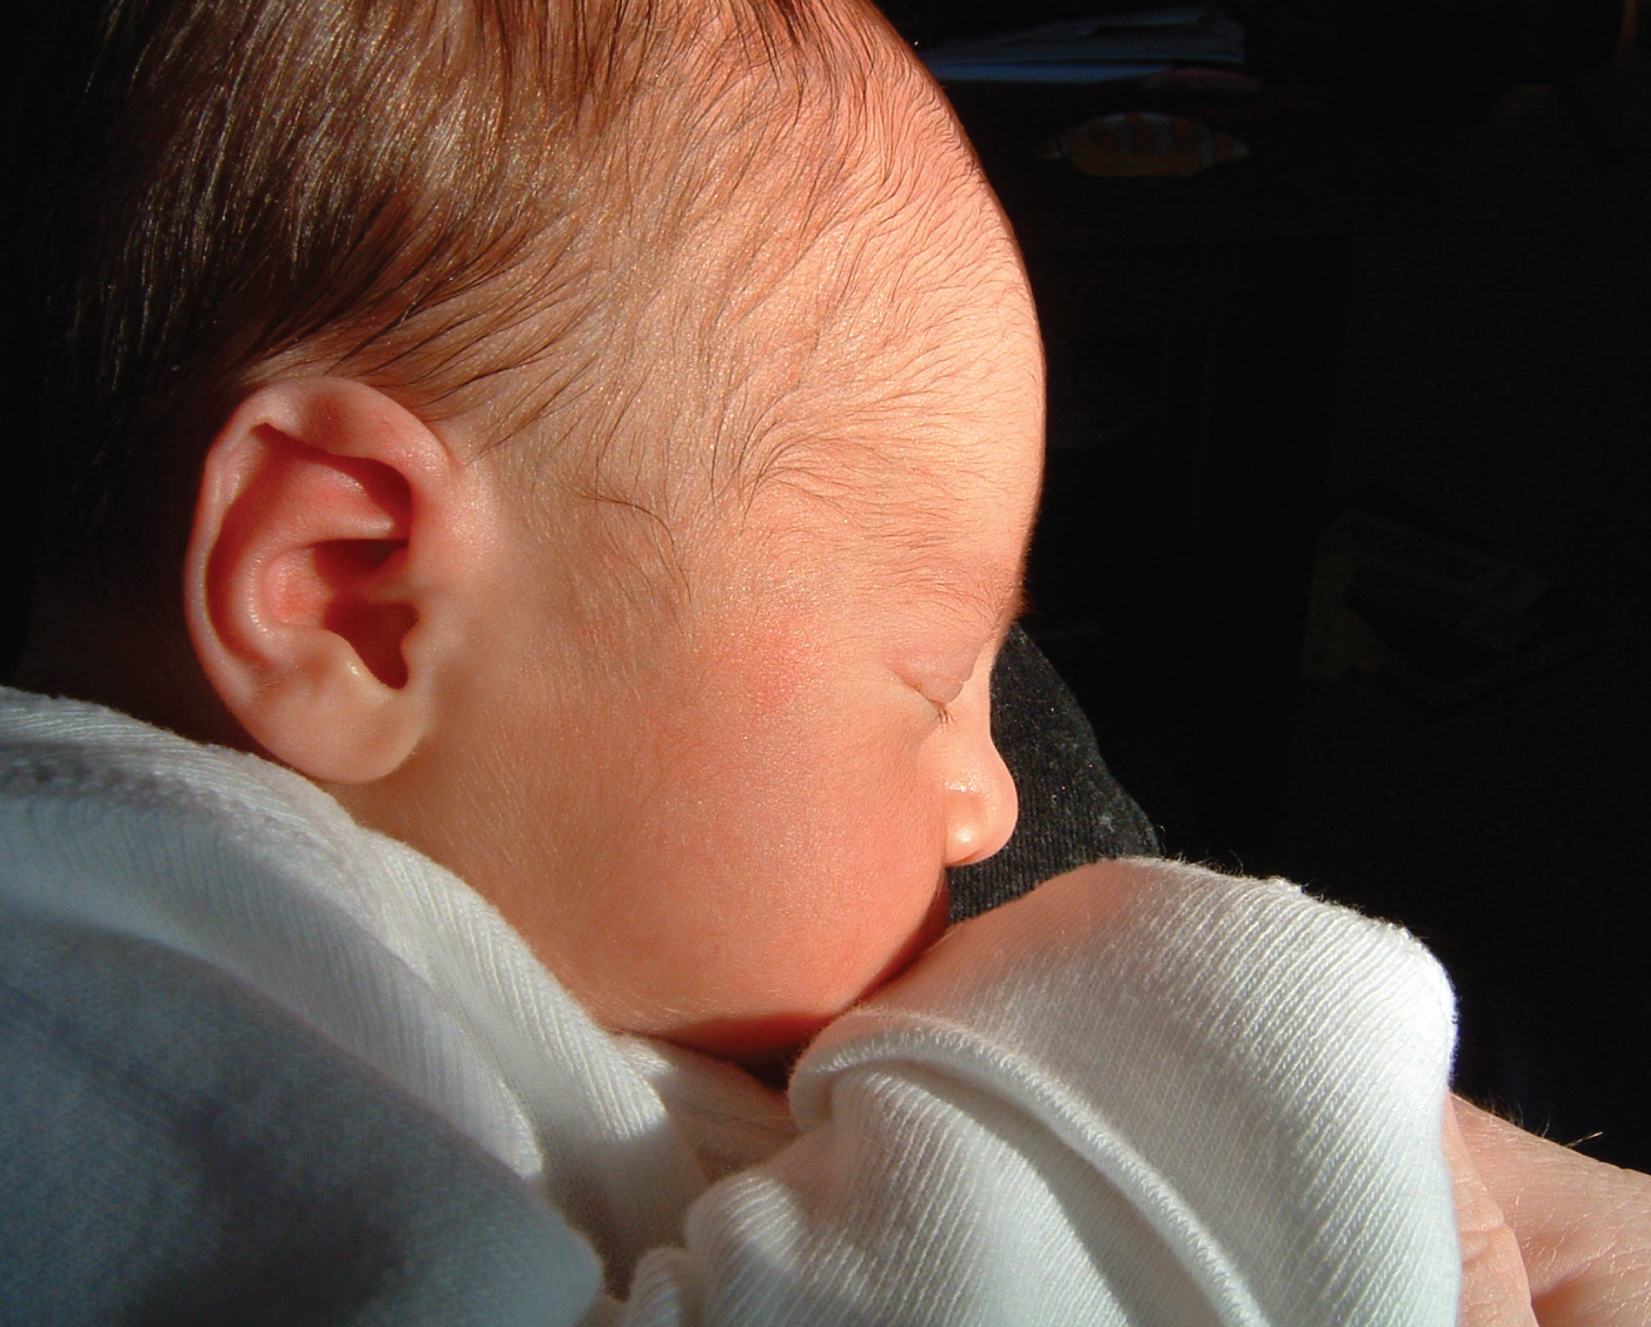 This photograph shows a newborn baby.